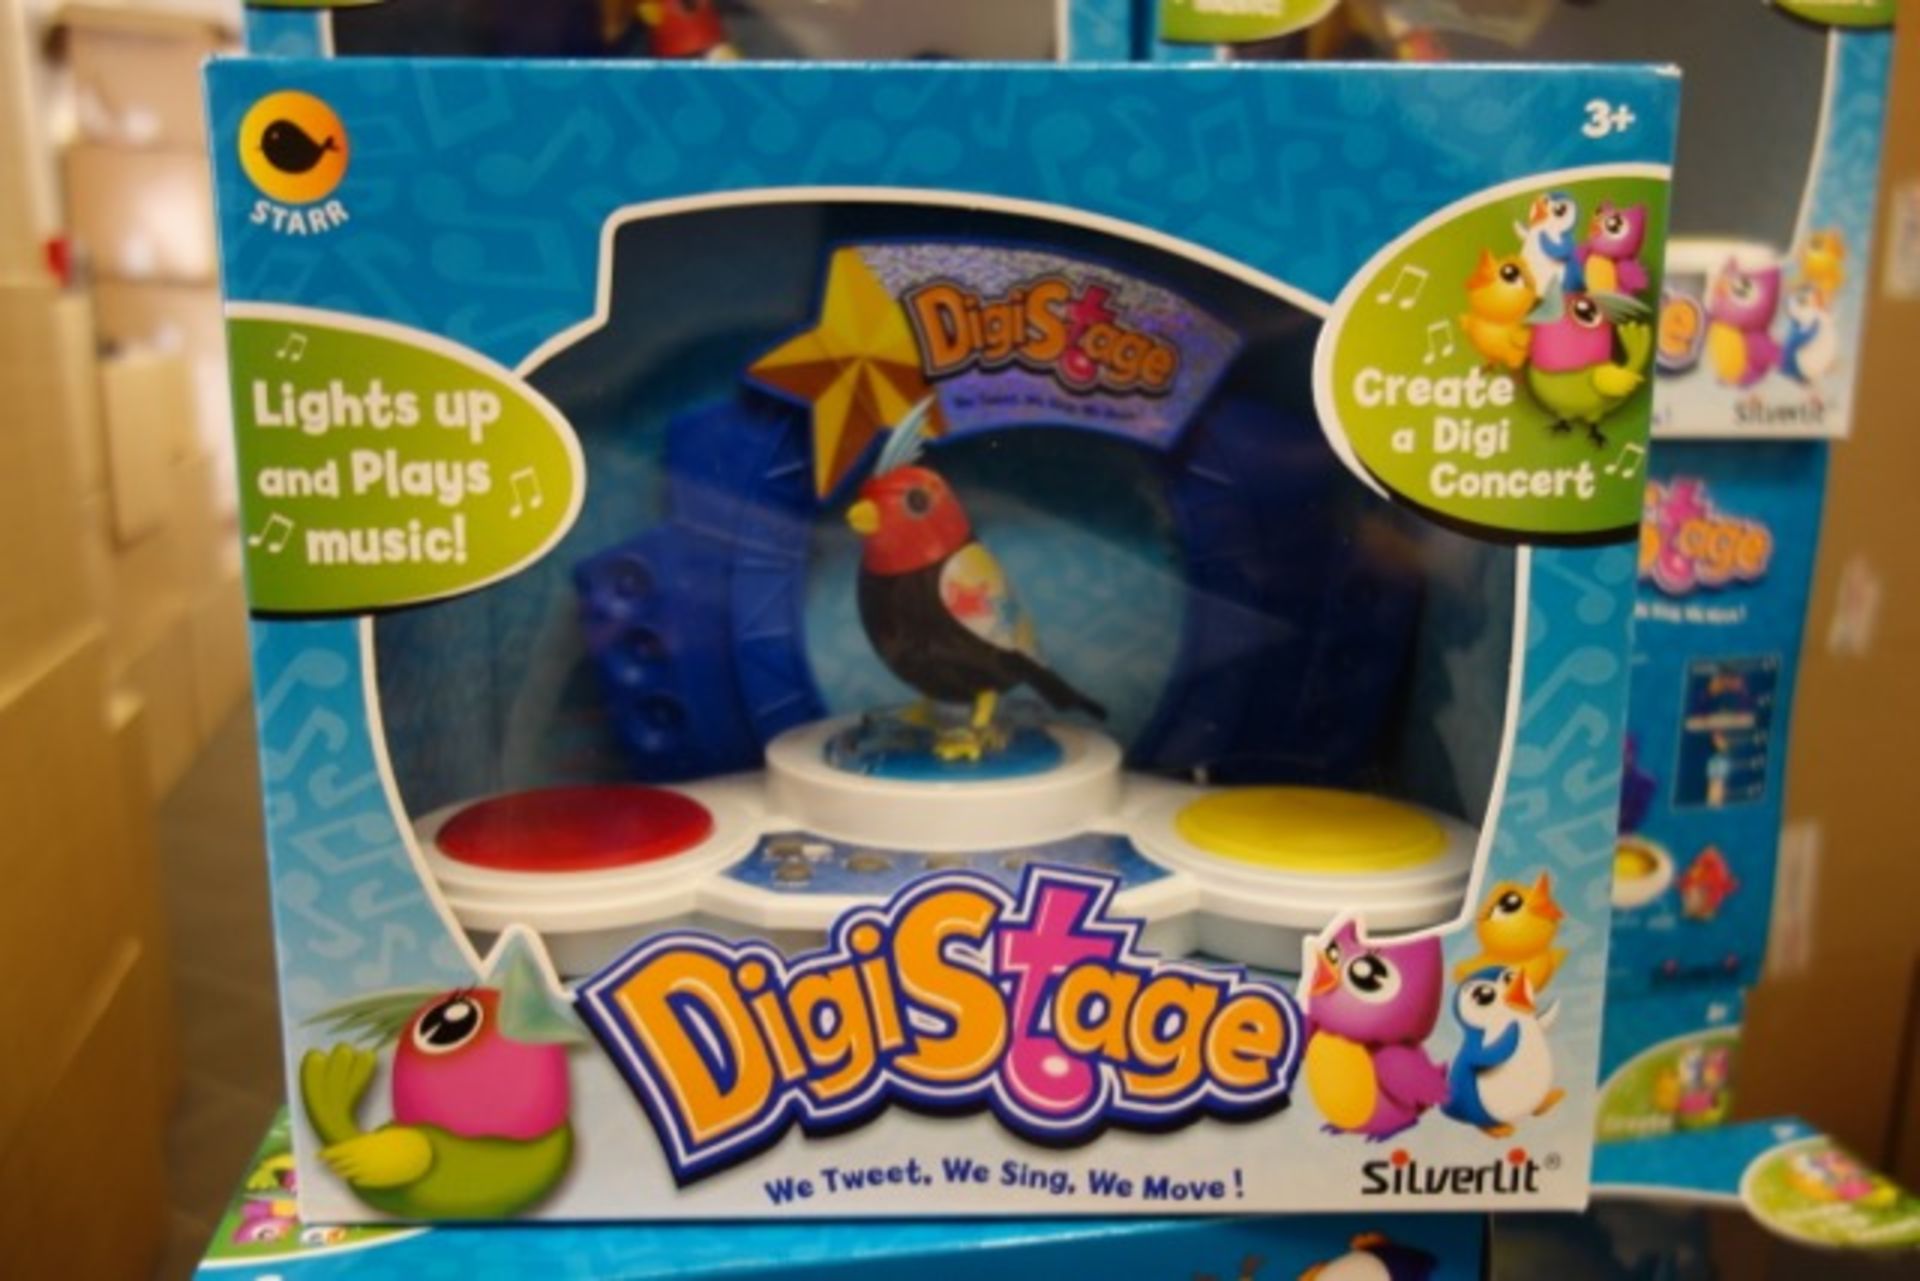 12 x Brand New - Digistage Digibirds Play Sets - Tweets, Sings & Moves. Create a digi concert.